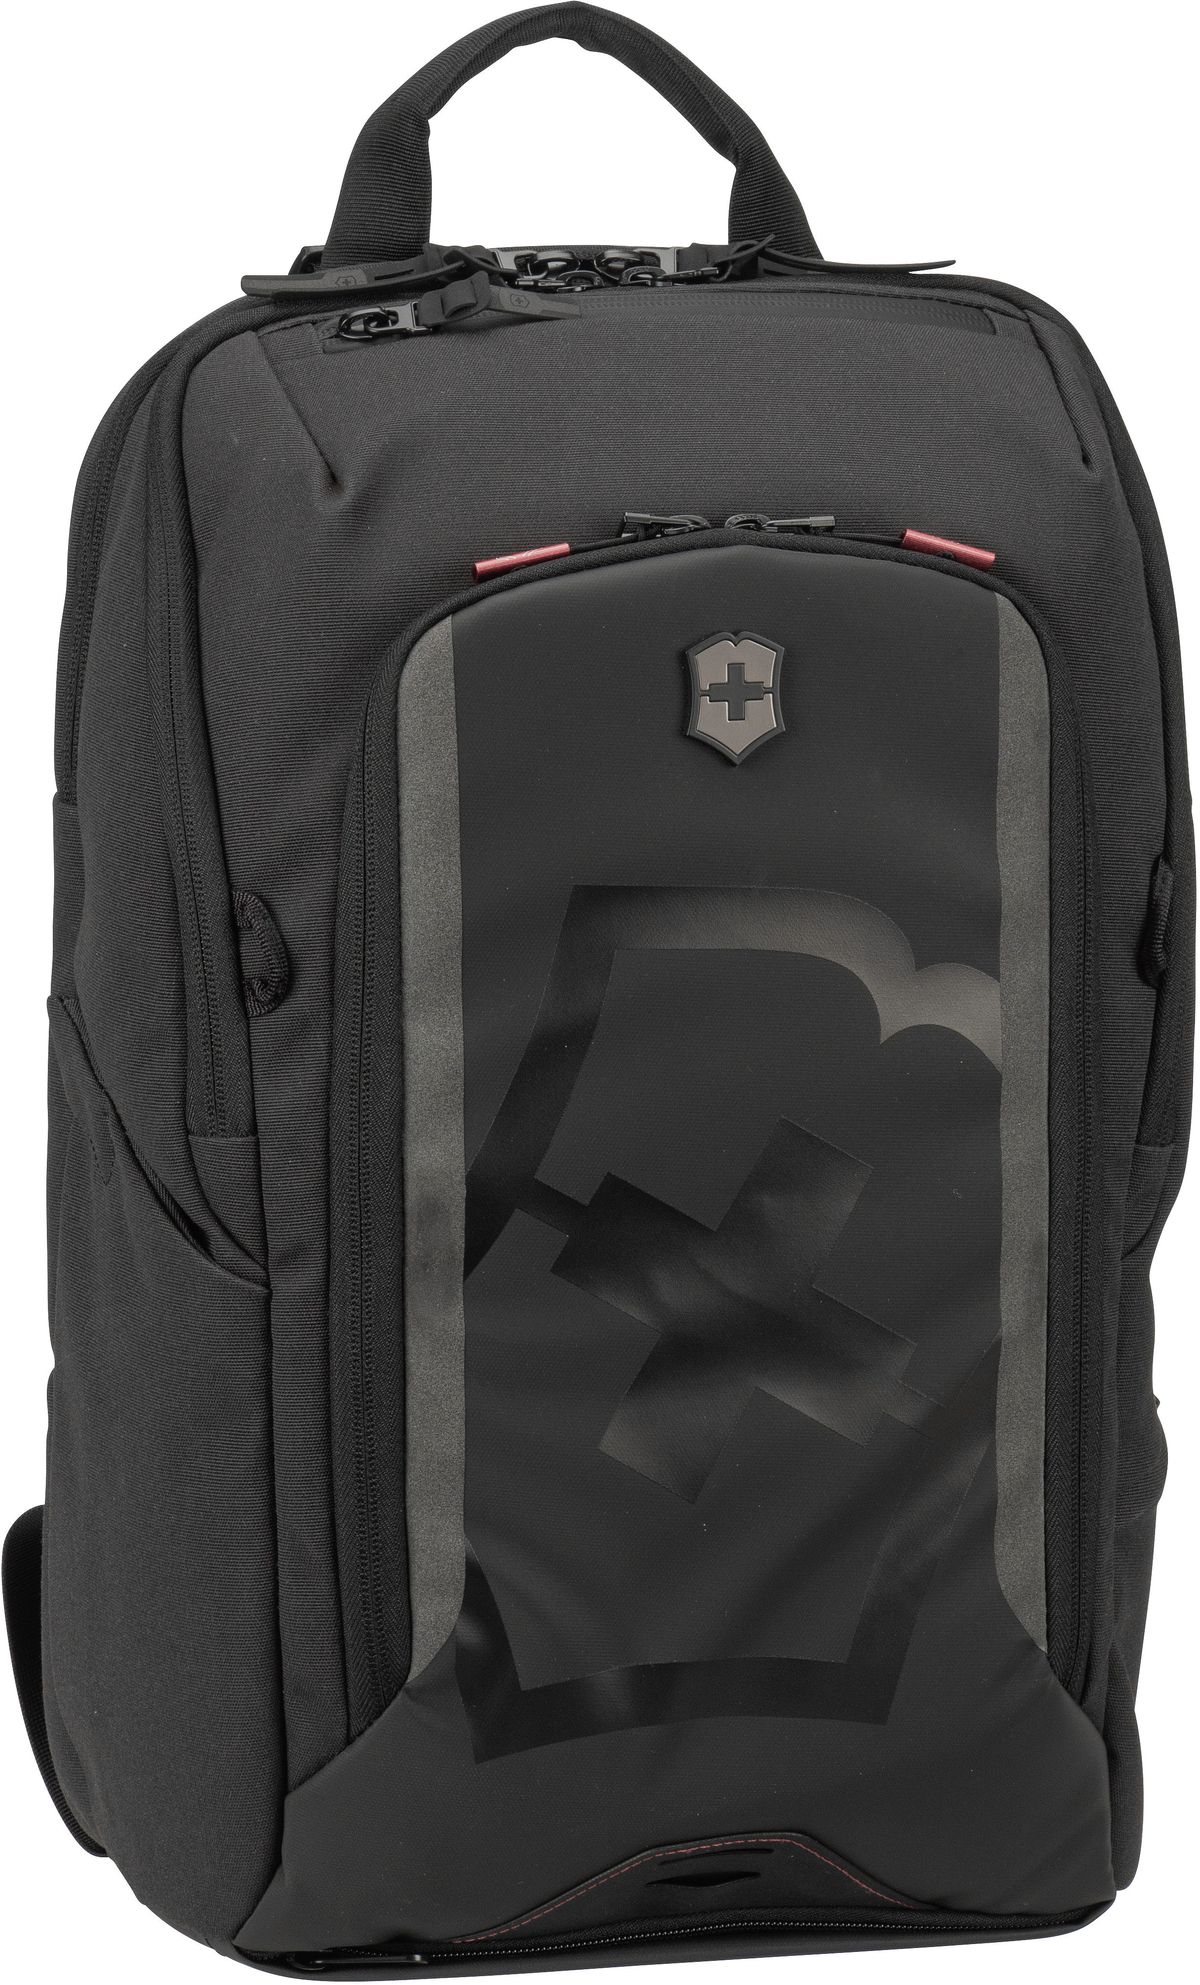 Victorinox Touring 2.0 Commuter Backpack - Black